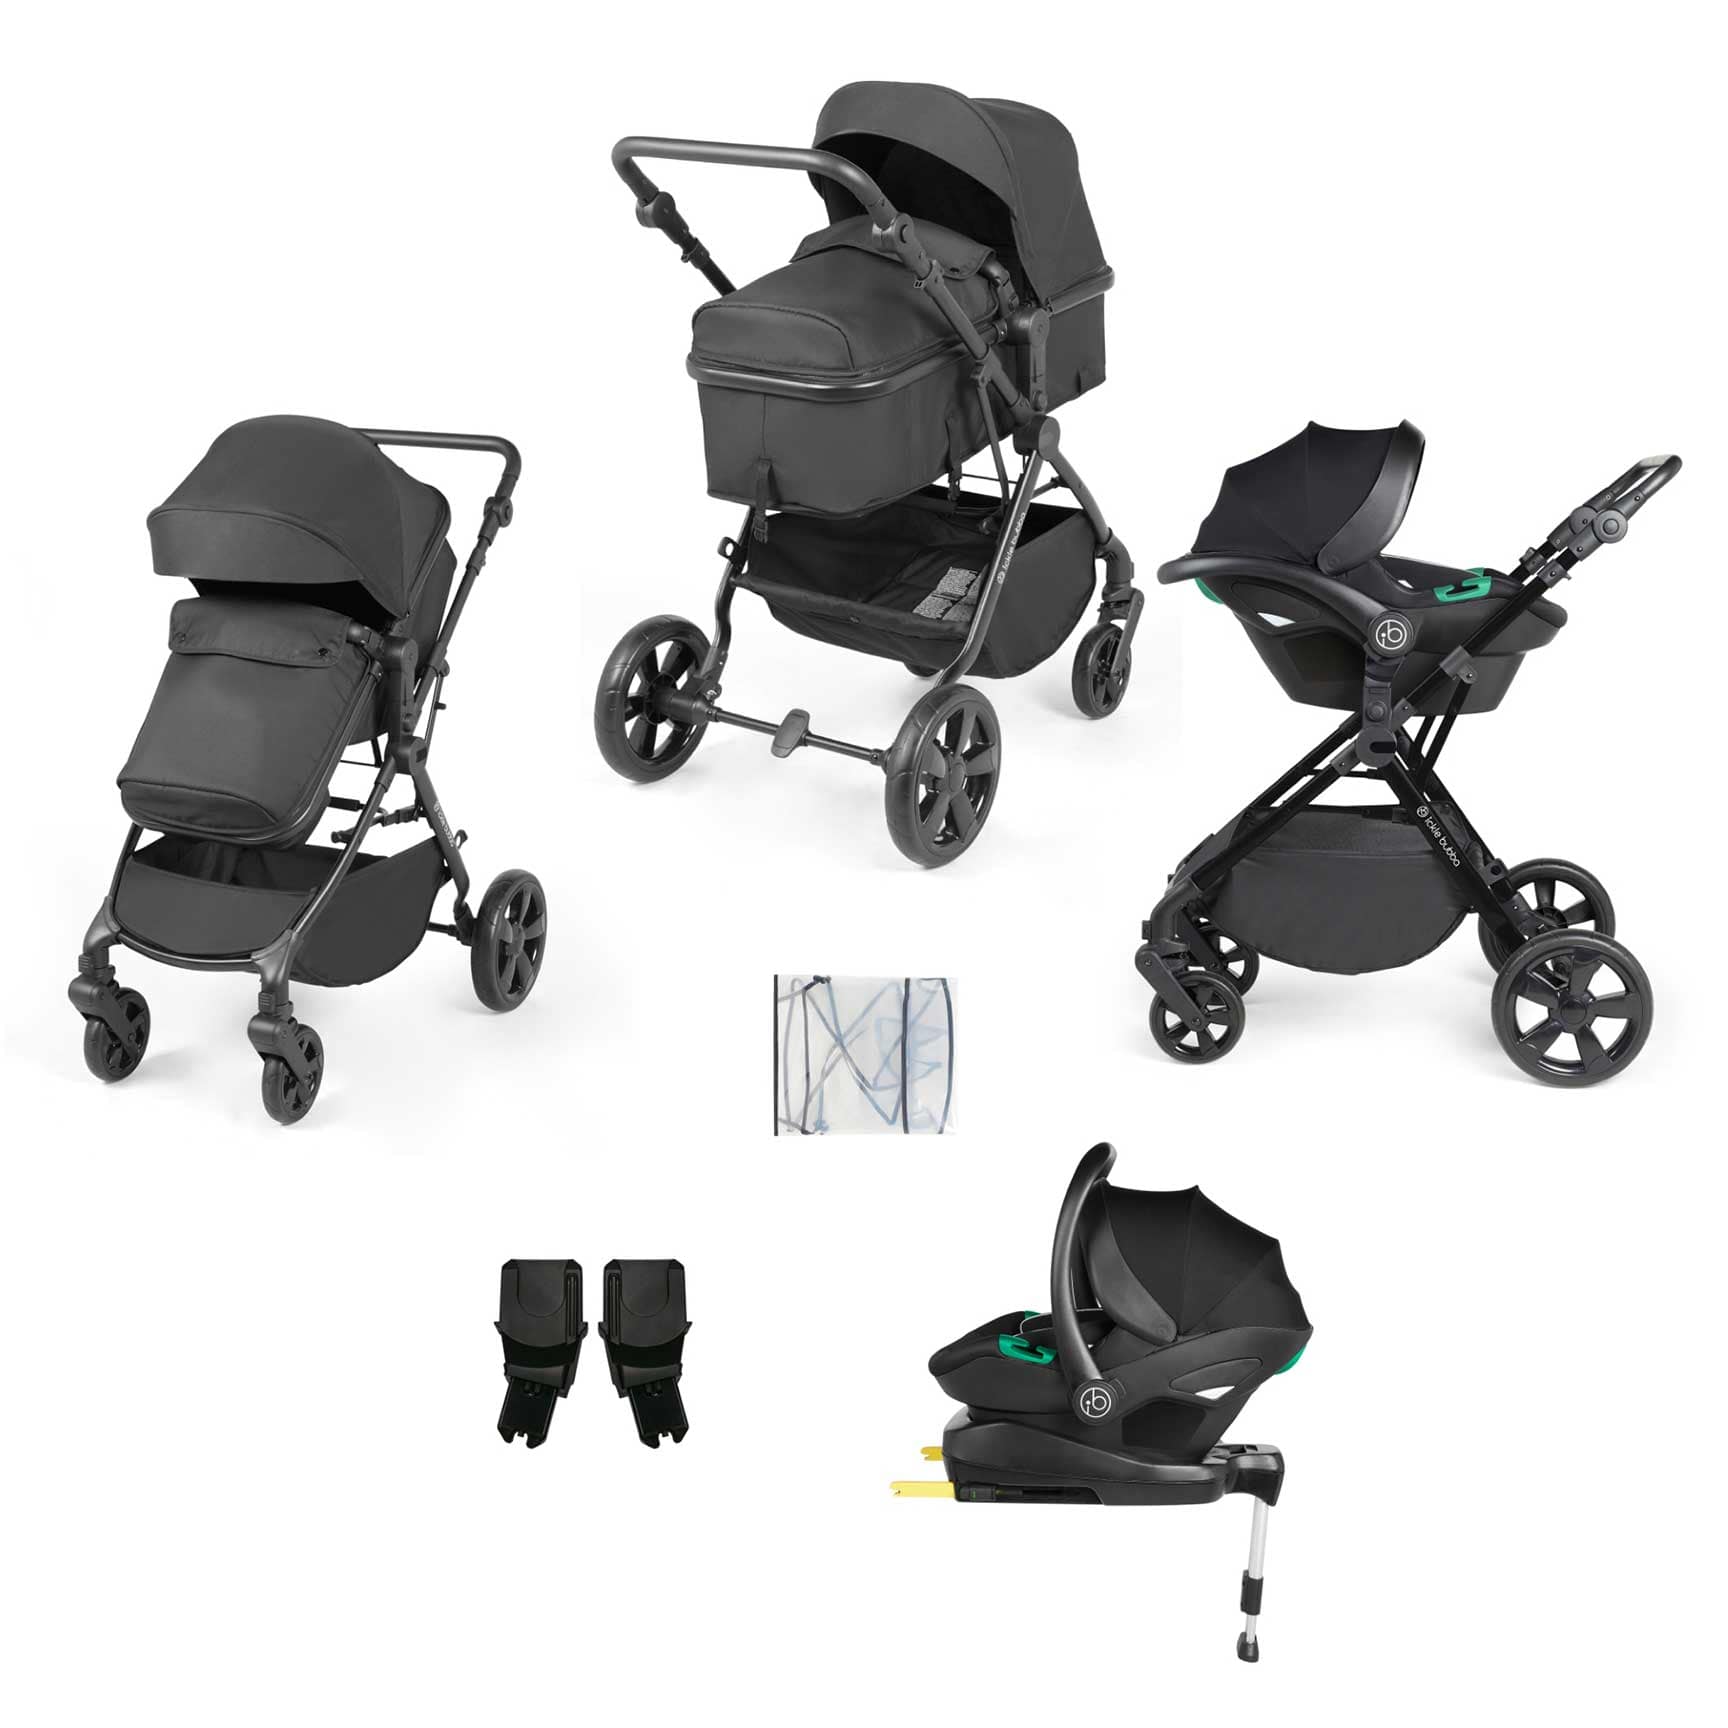 Ickle Bubba baby prams Ickle Bubba Comet All-in-One I-Size Travel System with Isofix Base - Black 10-008-300-002